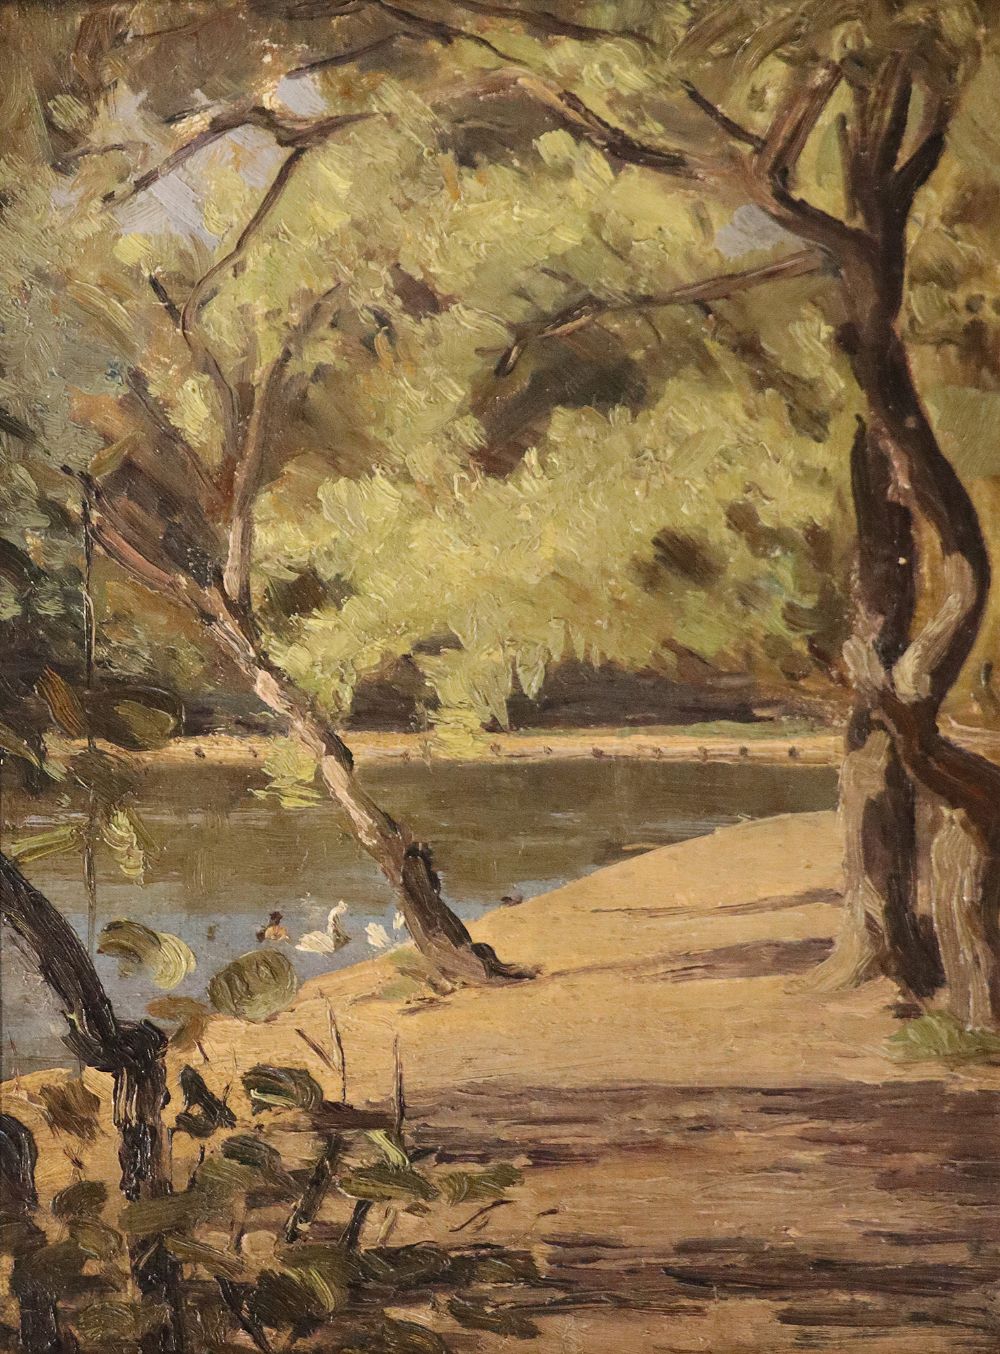 Lot 105 - STEPHENS GREEN by Ronald Ossory Dunlop